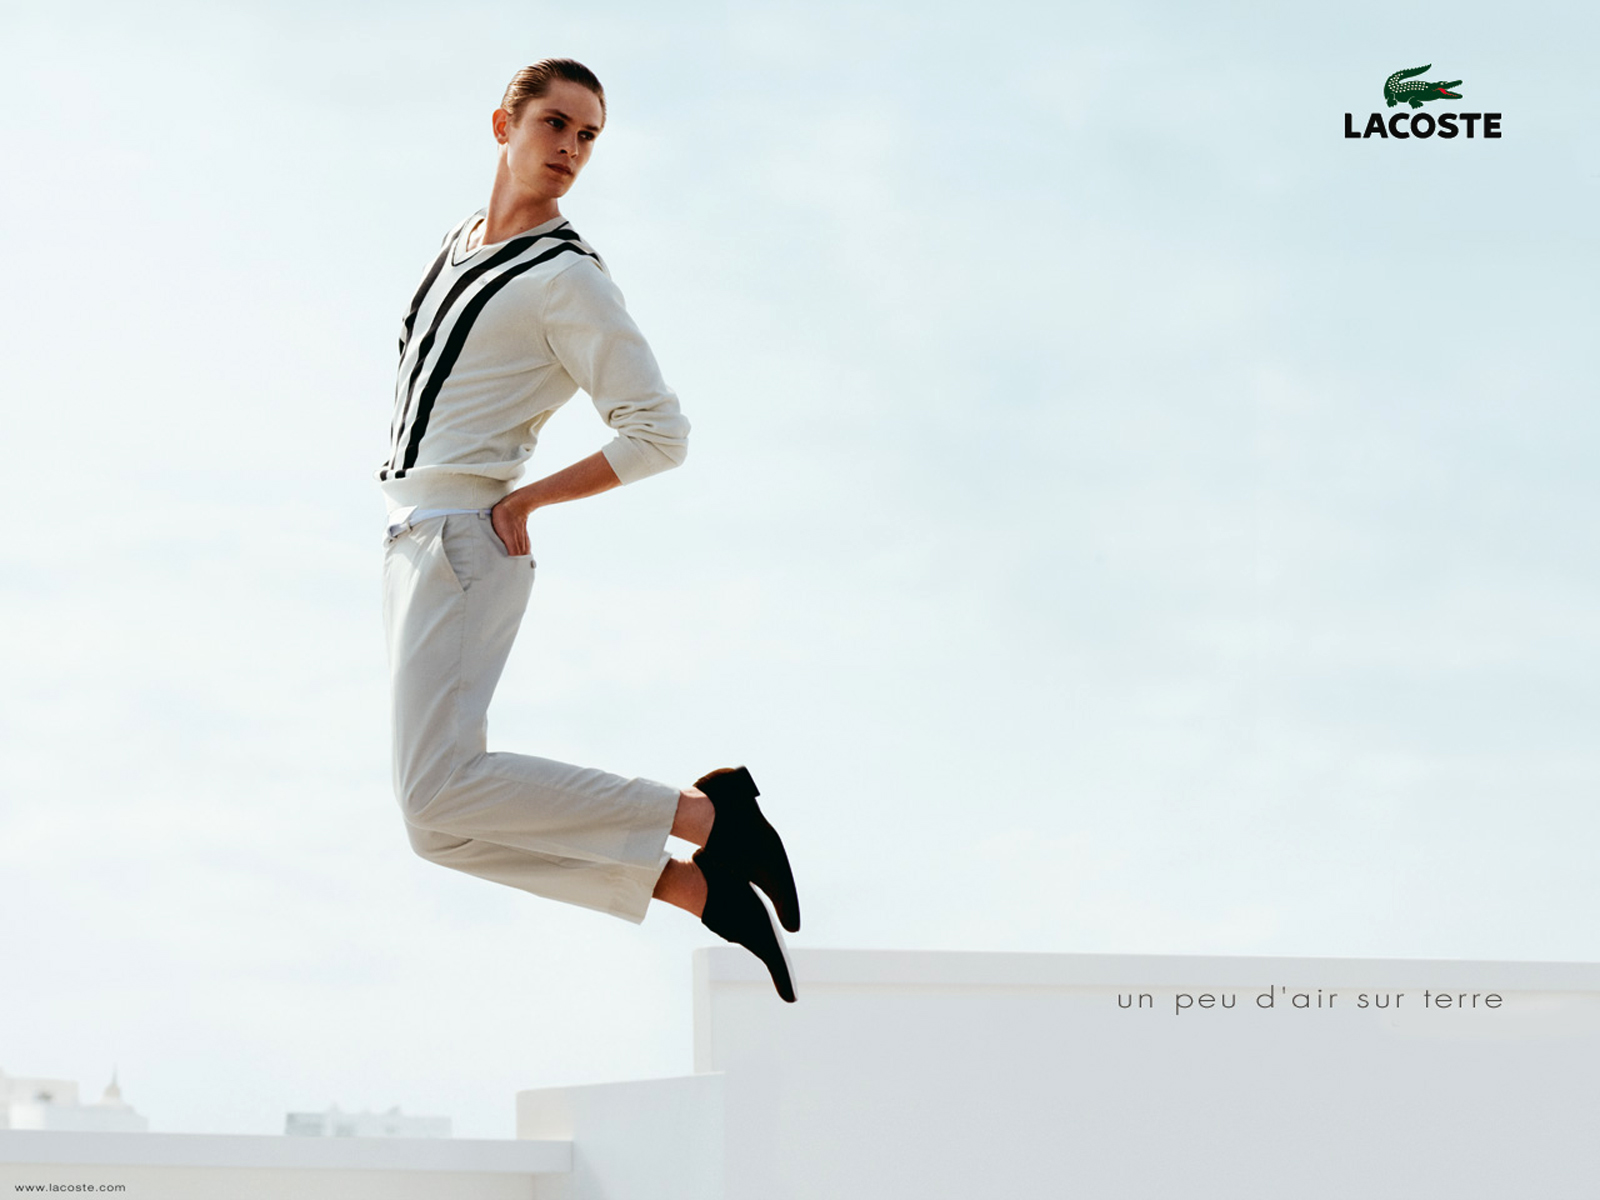 Cool Lacoste Ads HD Fashion Wallpapers   Screensaver